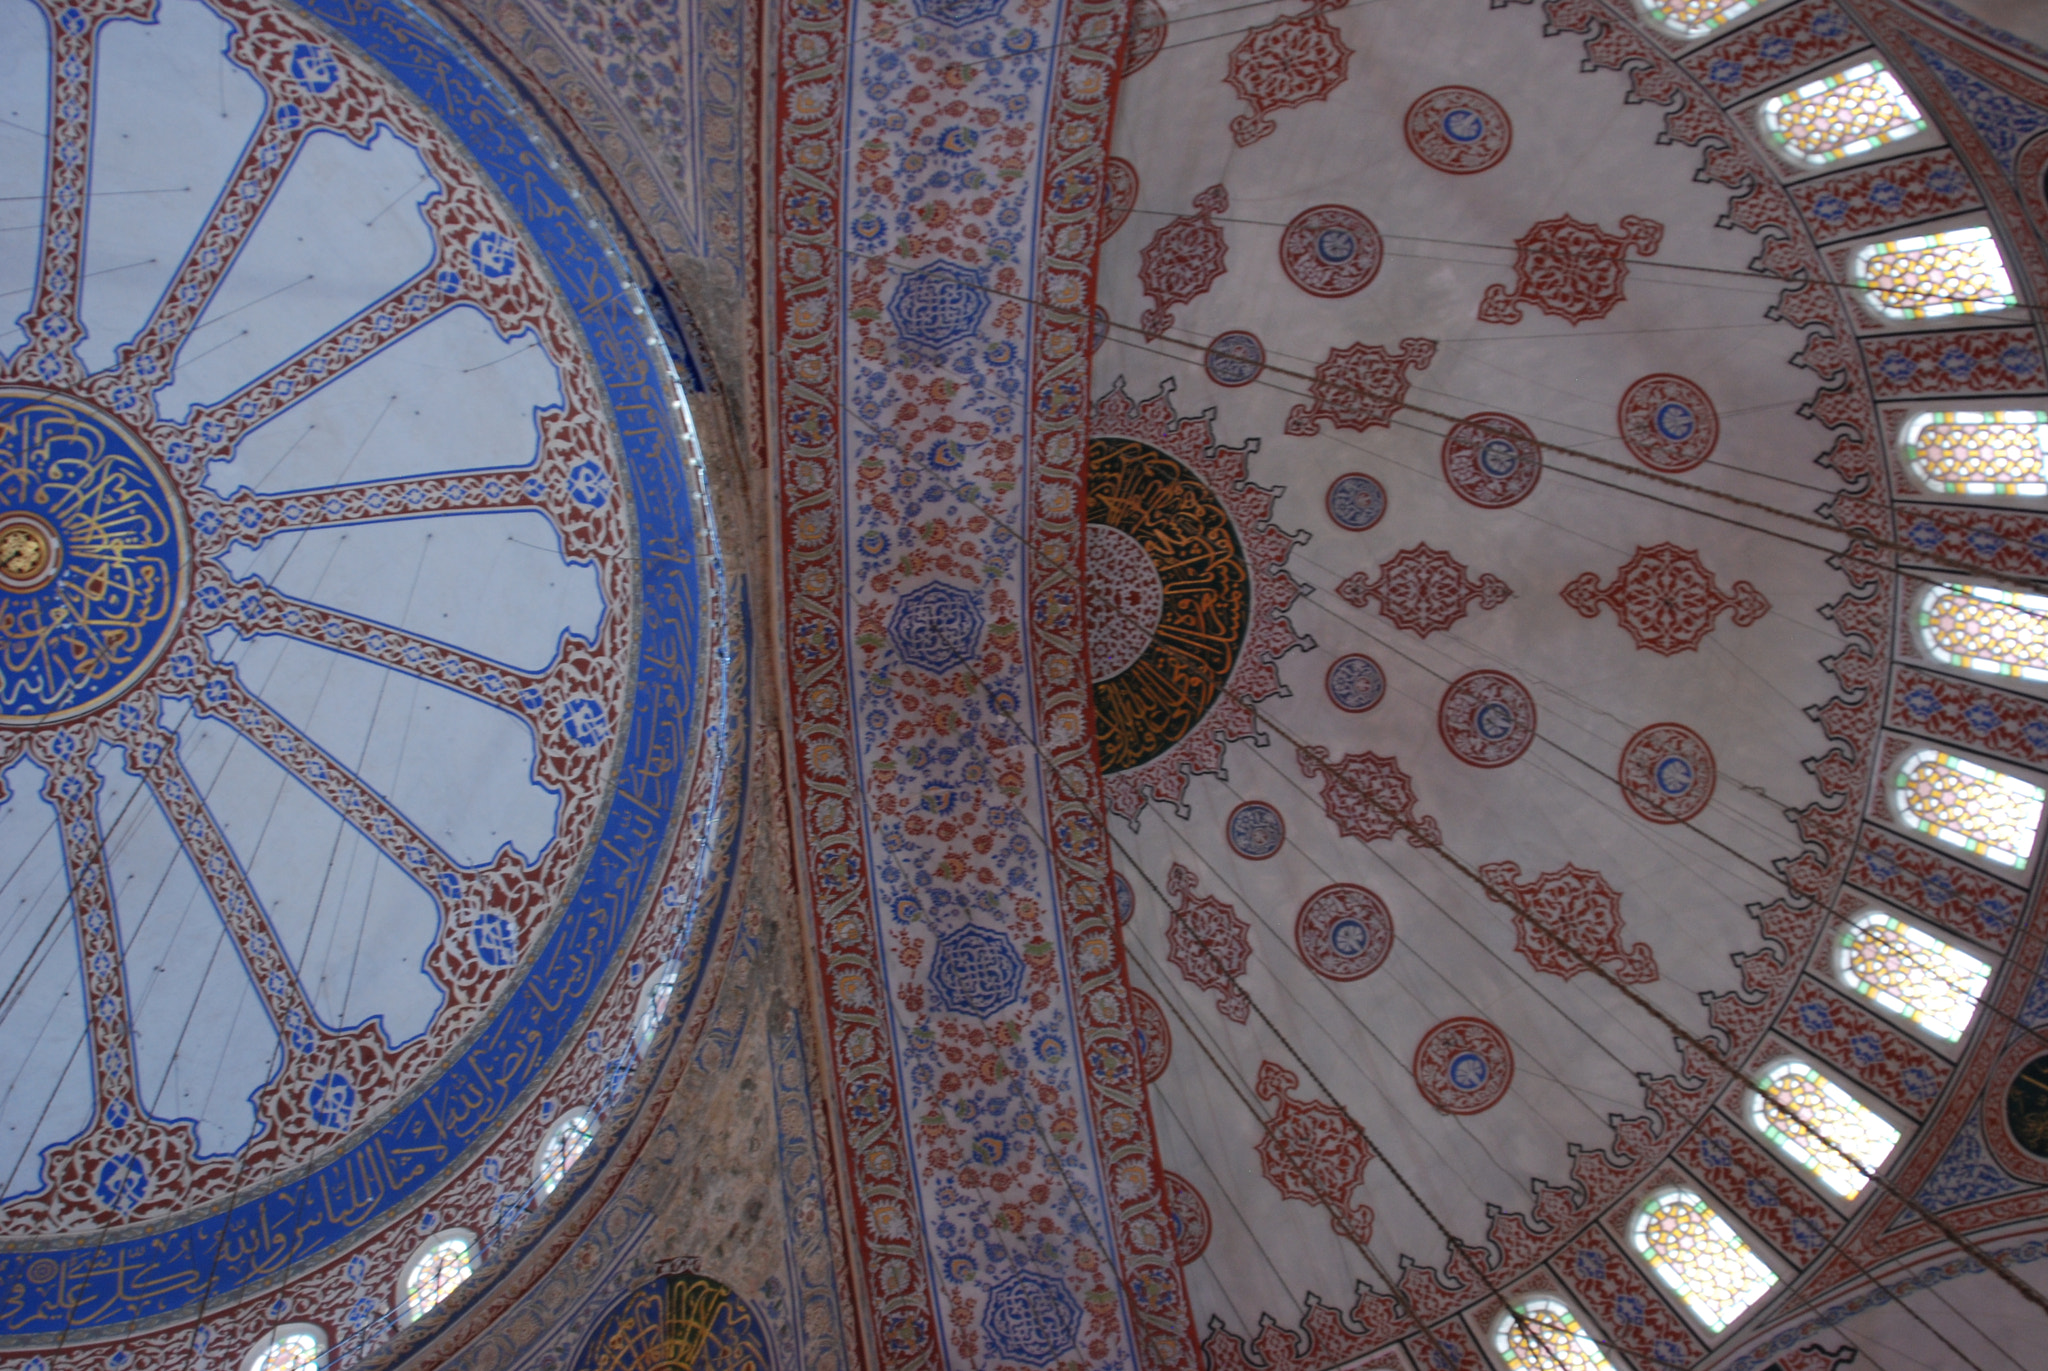 Nikon D80 + Tamron AF 28-300mm F3.5-6.3 XR Di LD Aspherical (IF) Macro sample photo. Blue mosque ceiling details photography